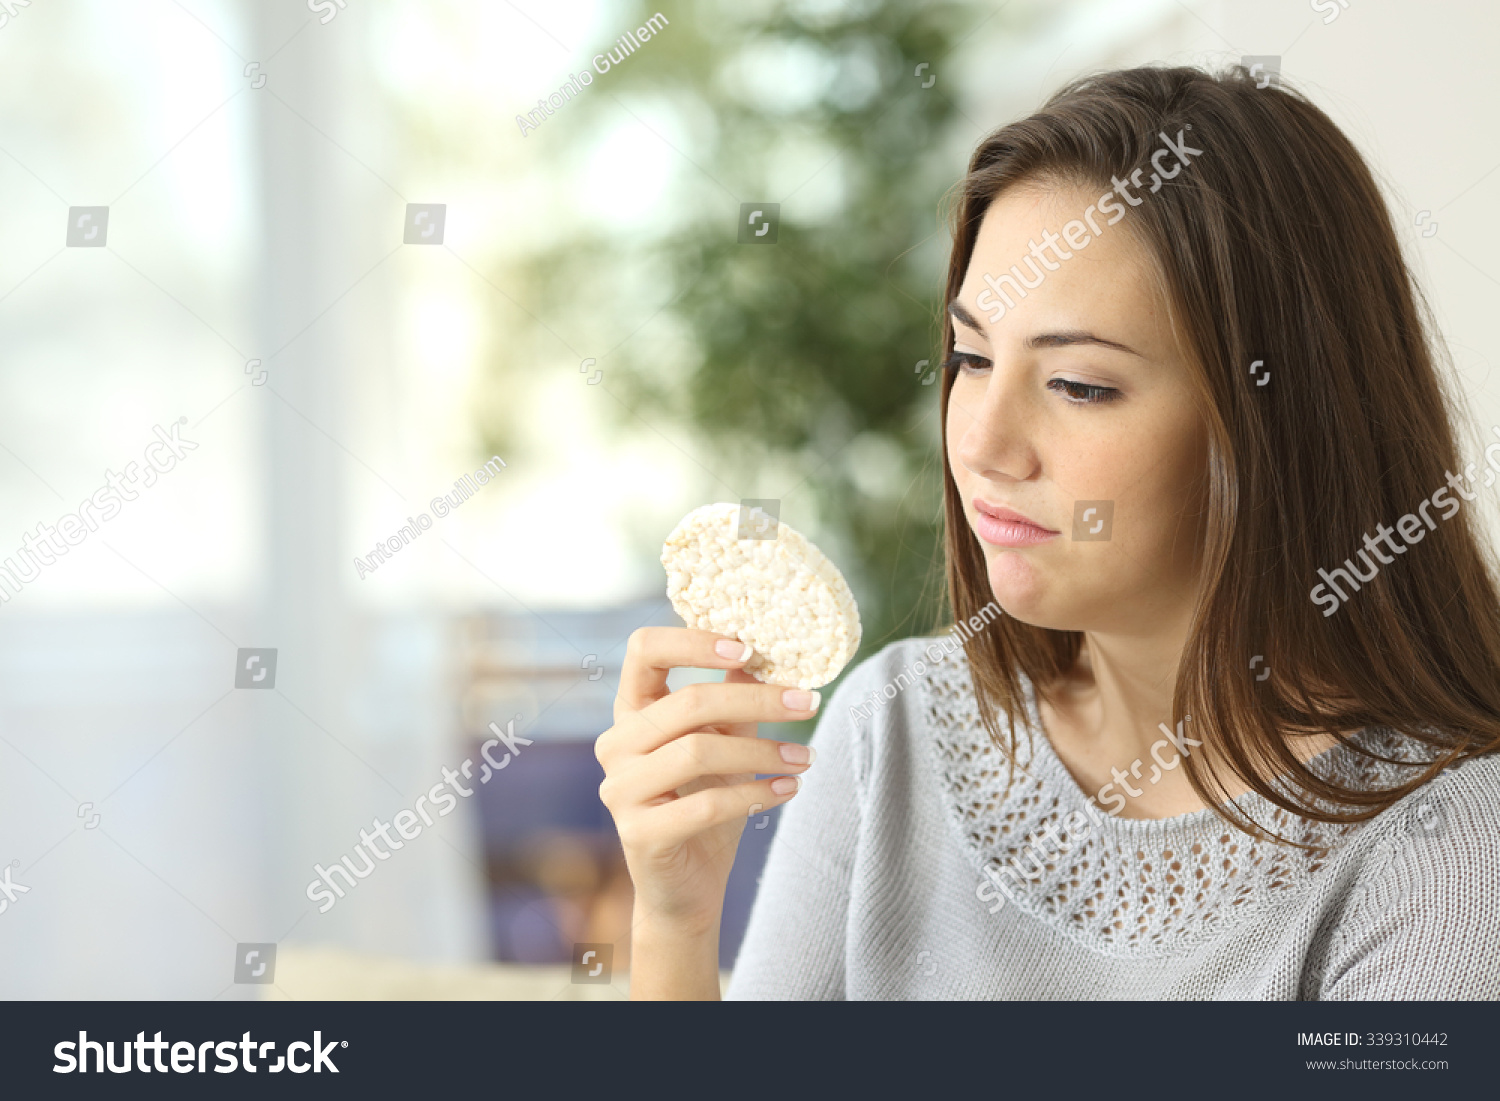 Girl disgusted looking a dietetic cookie. Bad diet concept #339310442